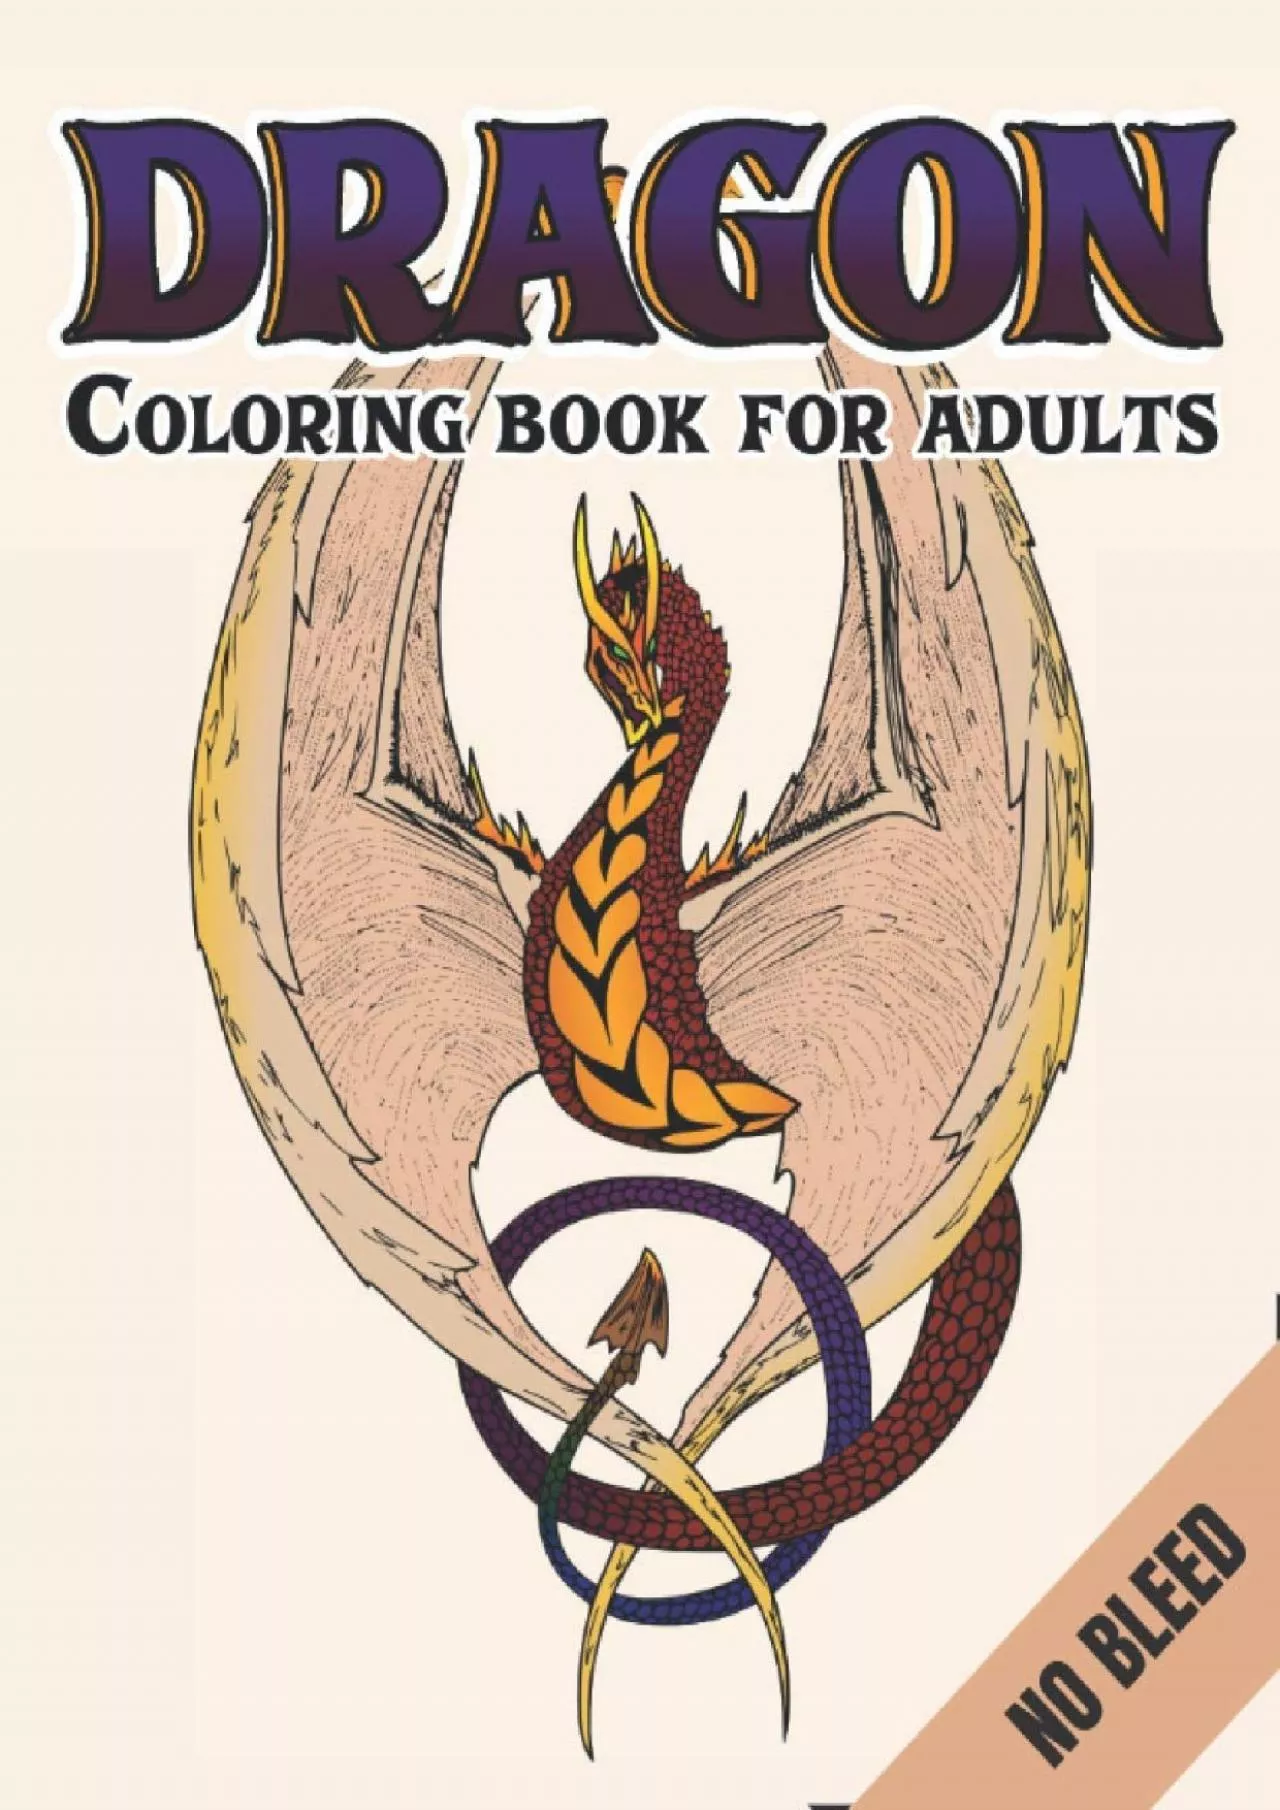 [eBOOK]-Dragon Coloring Book For Adults No Bleed: An Adult Coloring Book For Relaxation